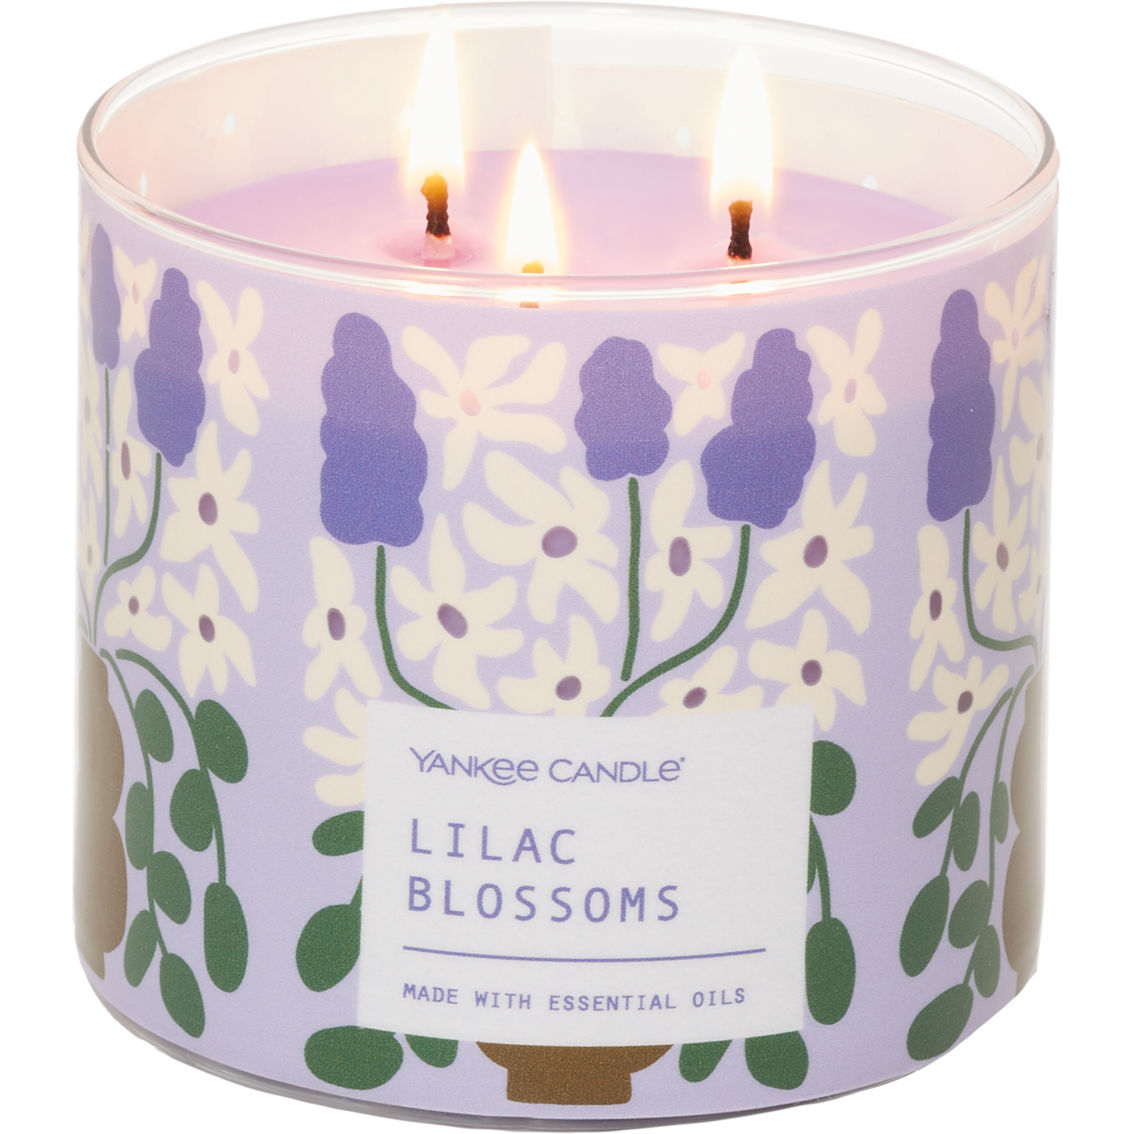 Yankee Candle Lilac Blossoms 3-Wick Candle - Image 2 of 2